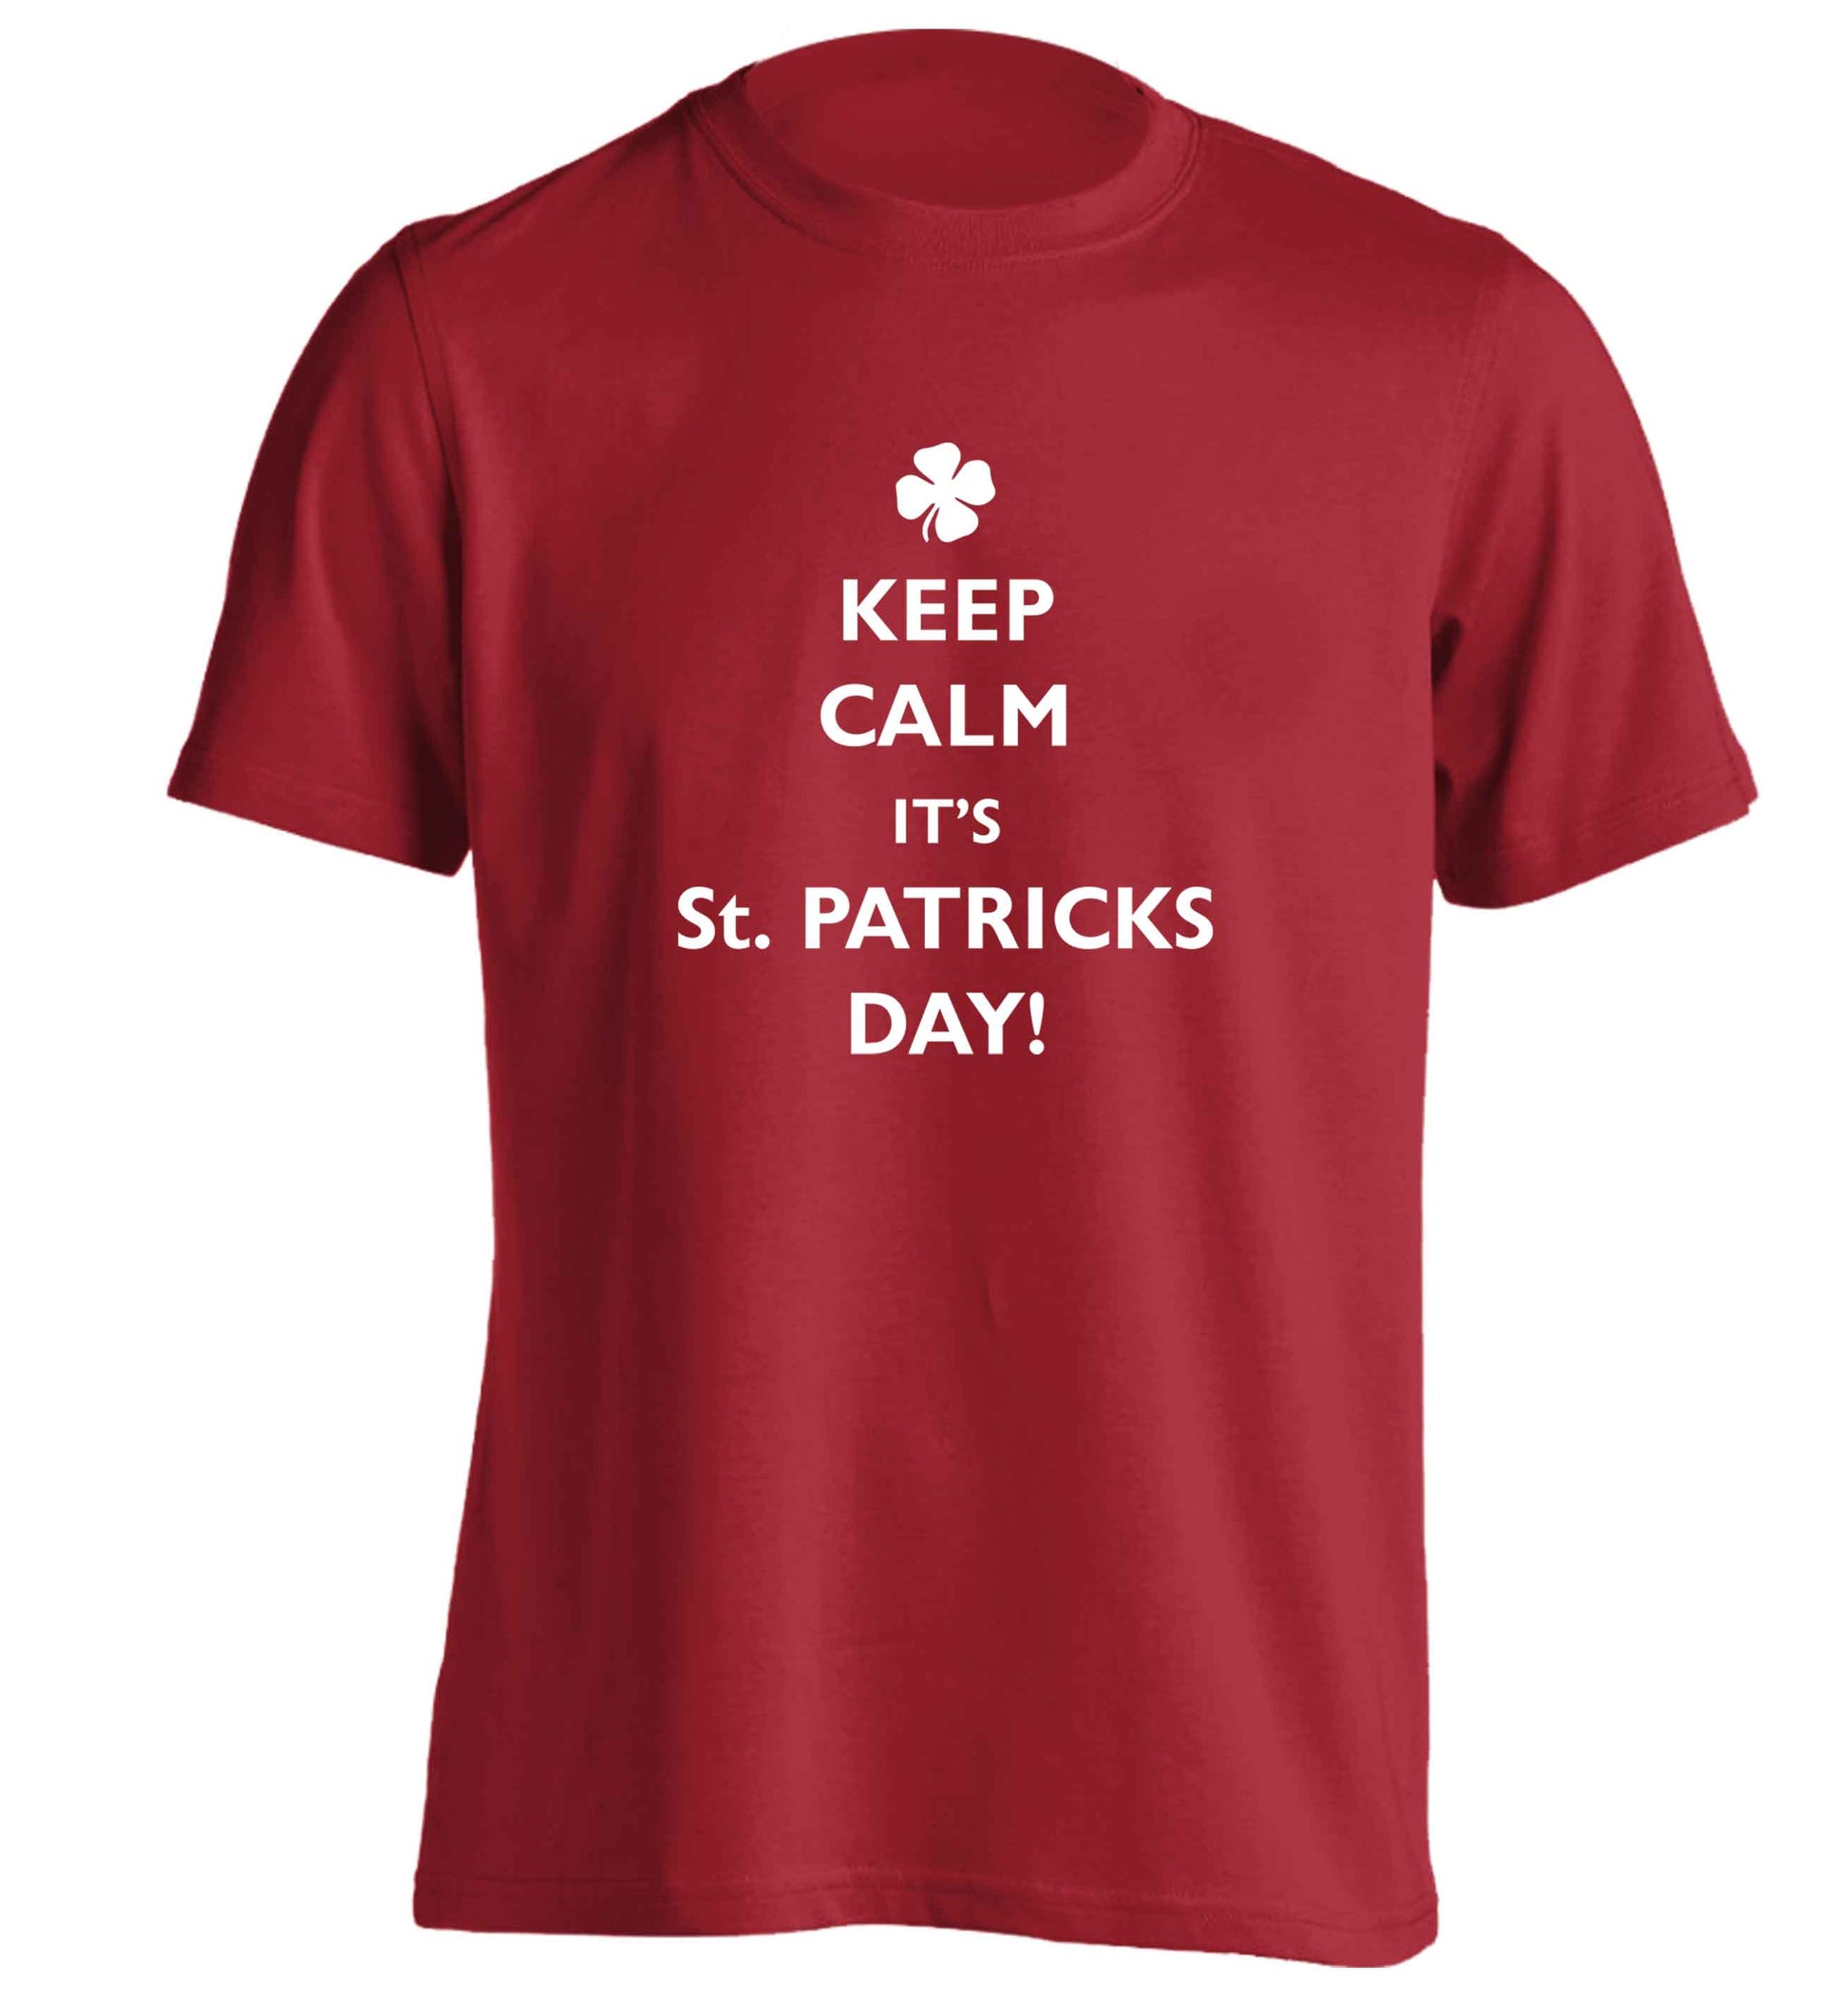 I can't keep calm it's St.Patricks day adults unisex red Tshirt 2XL